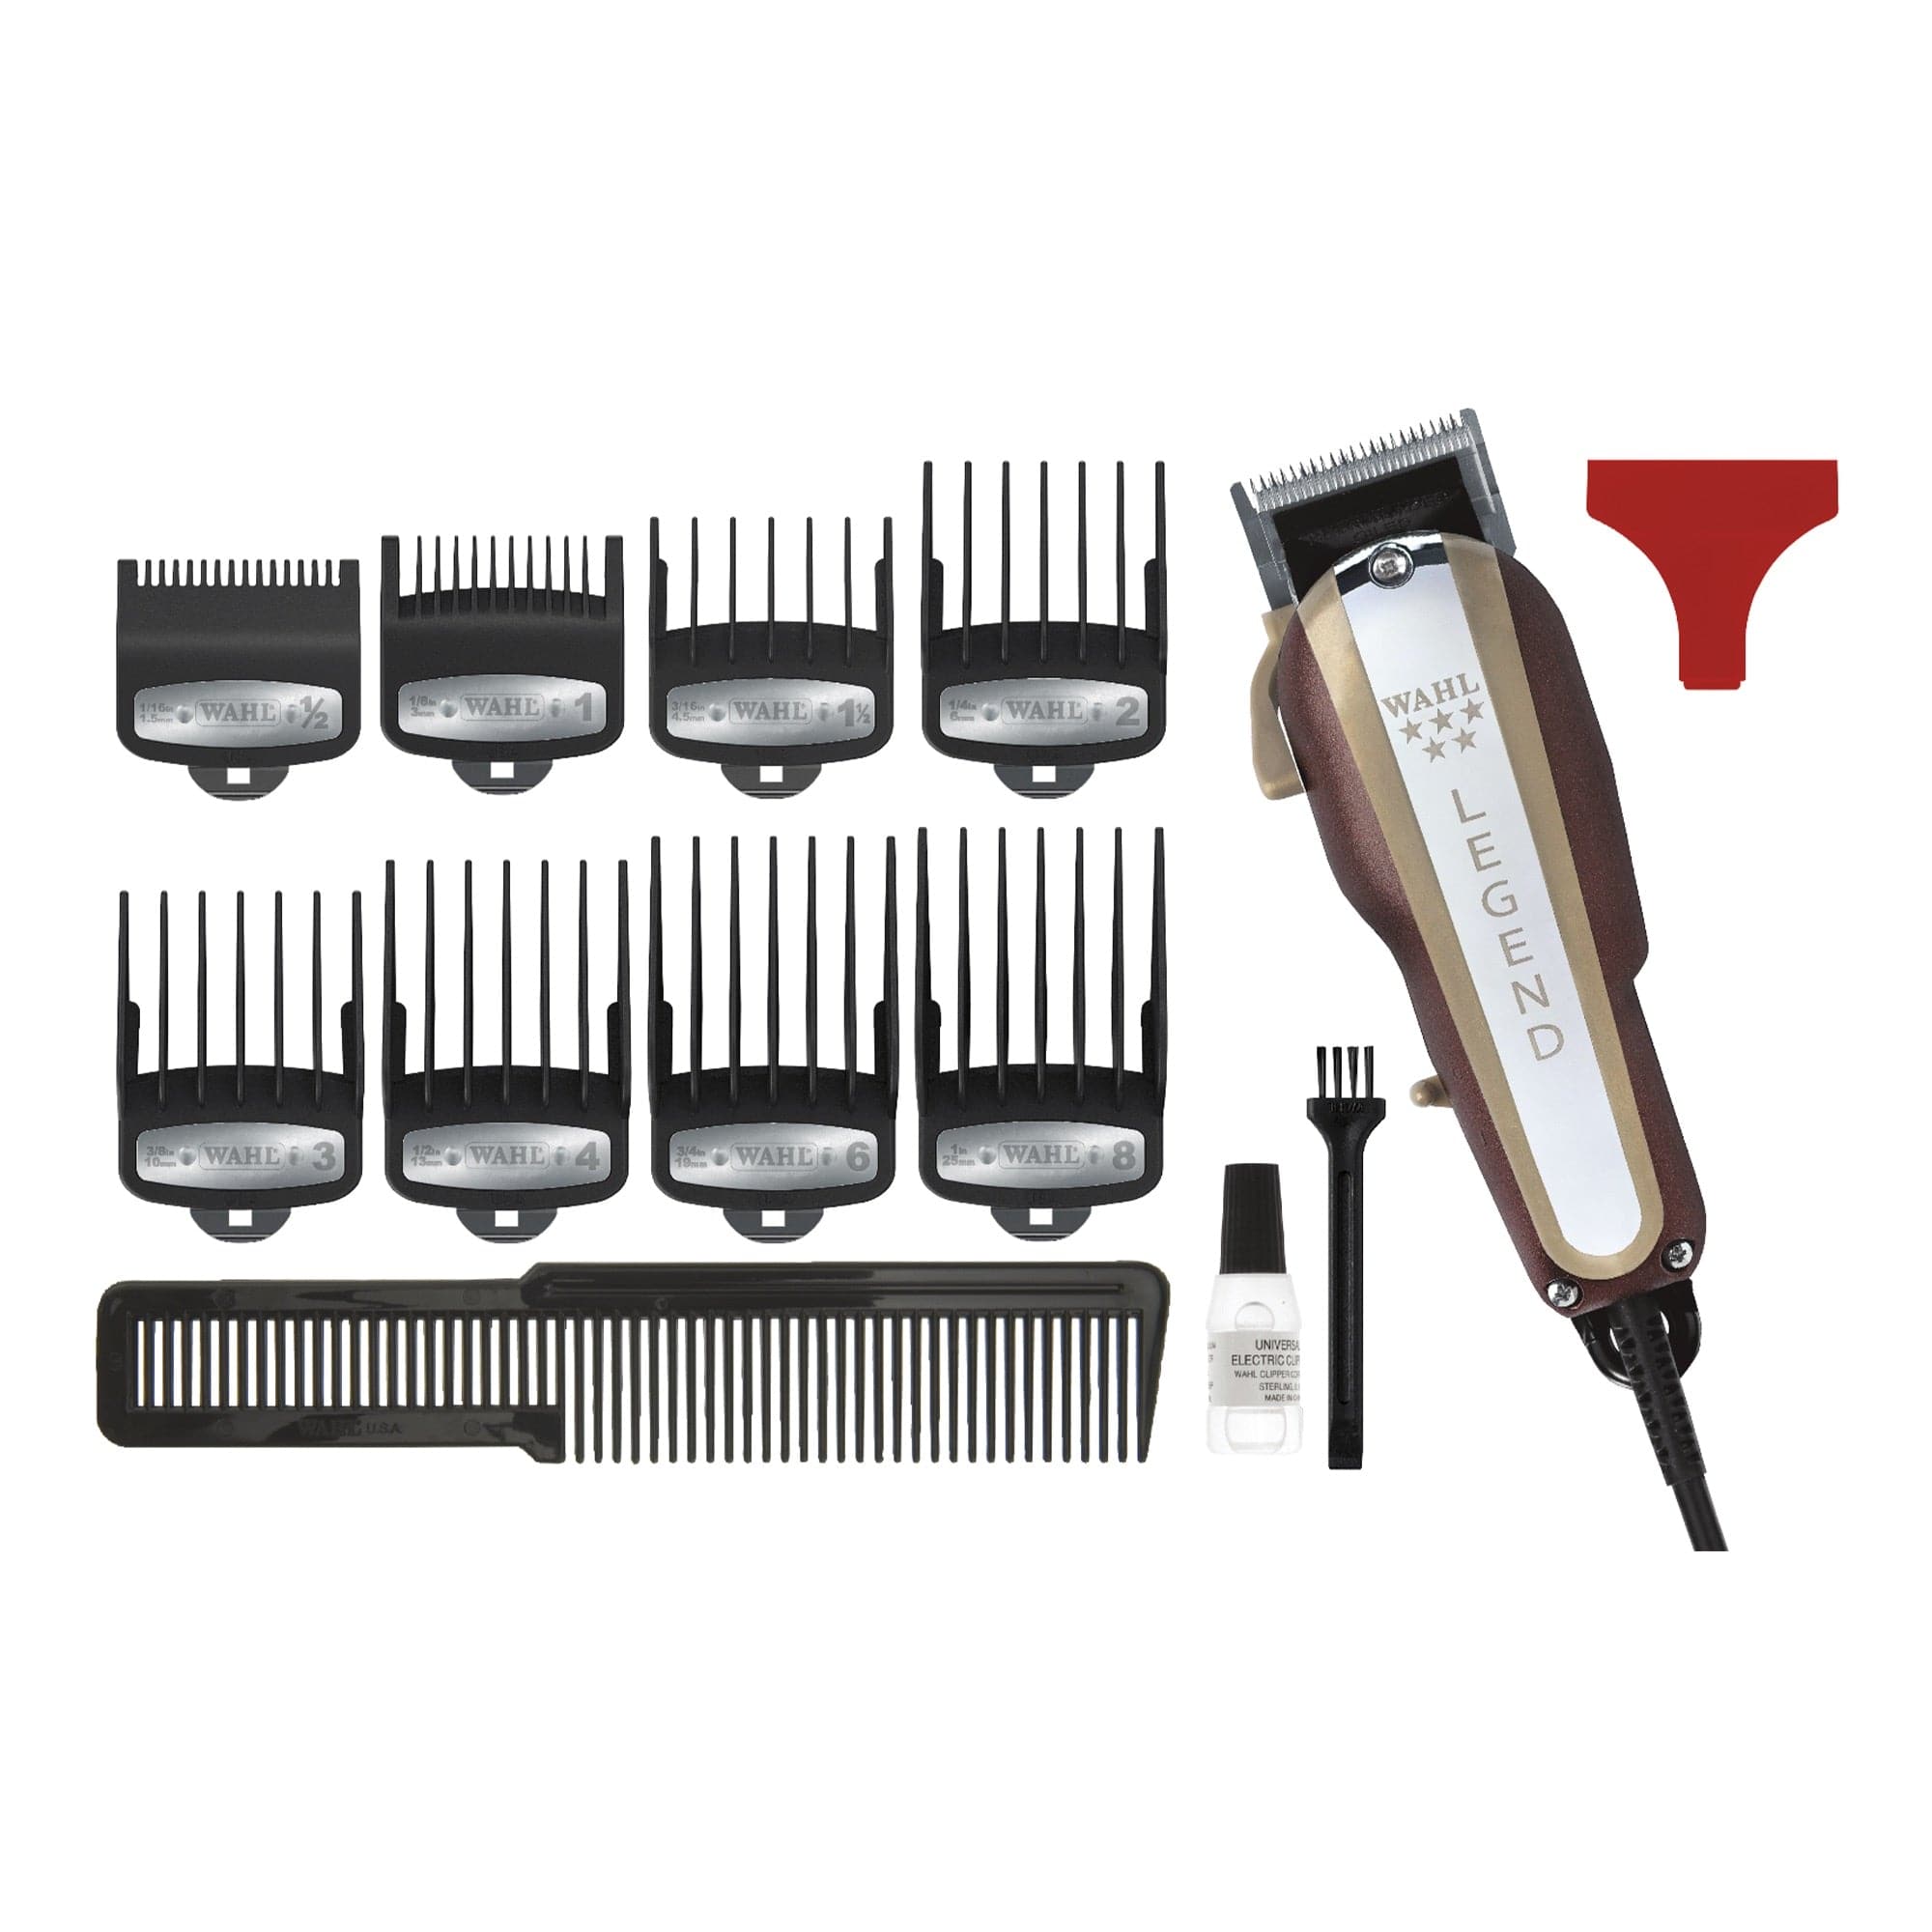 Wahl - 5 Star Legend Clipper Corded